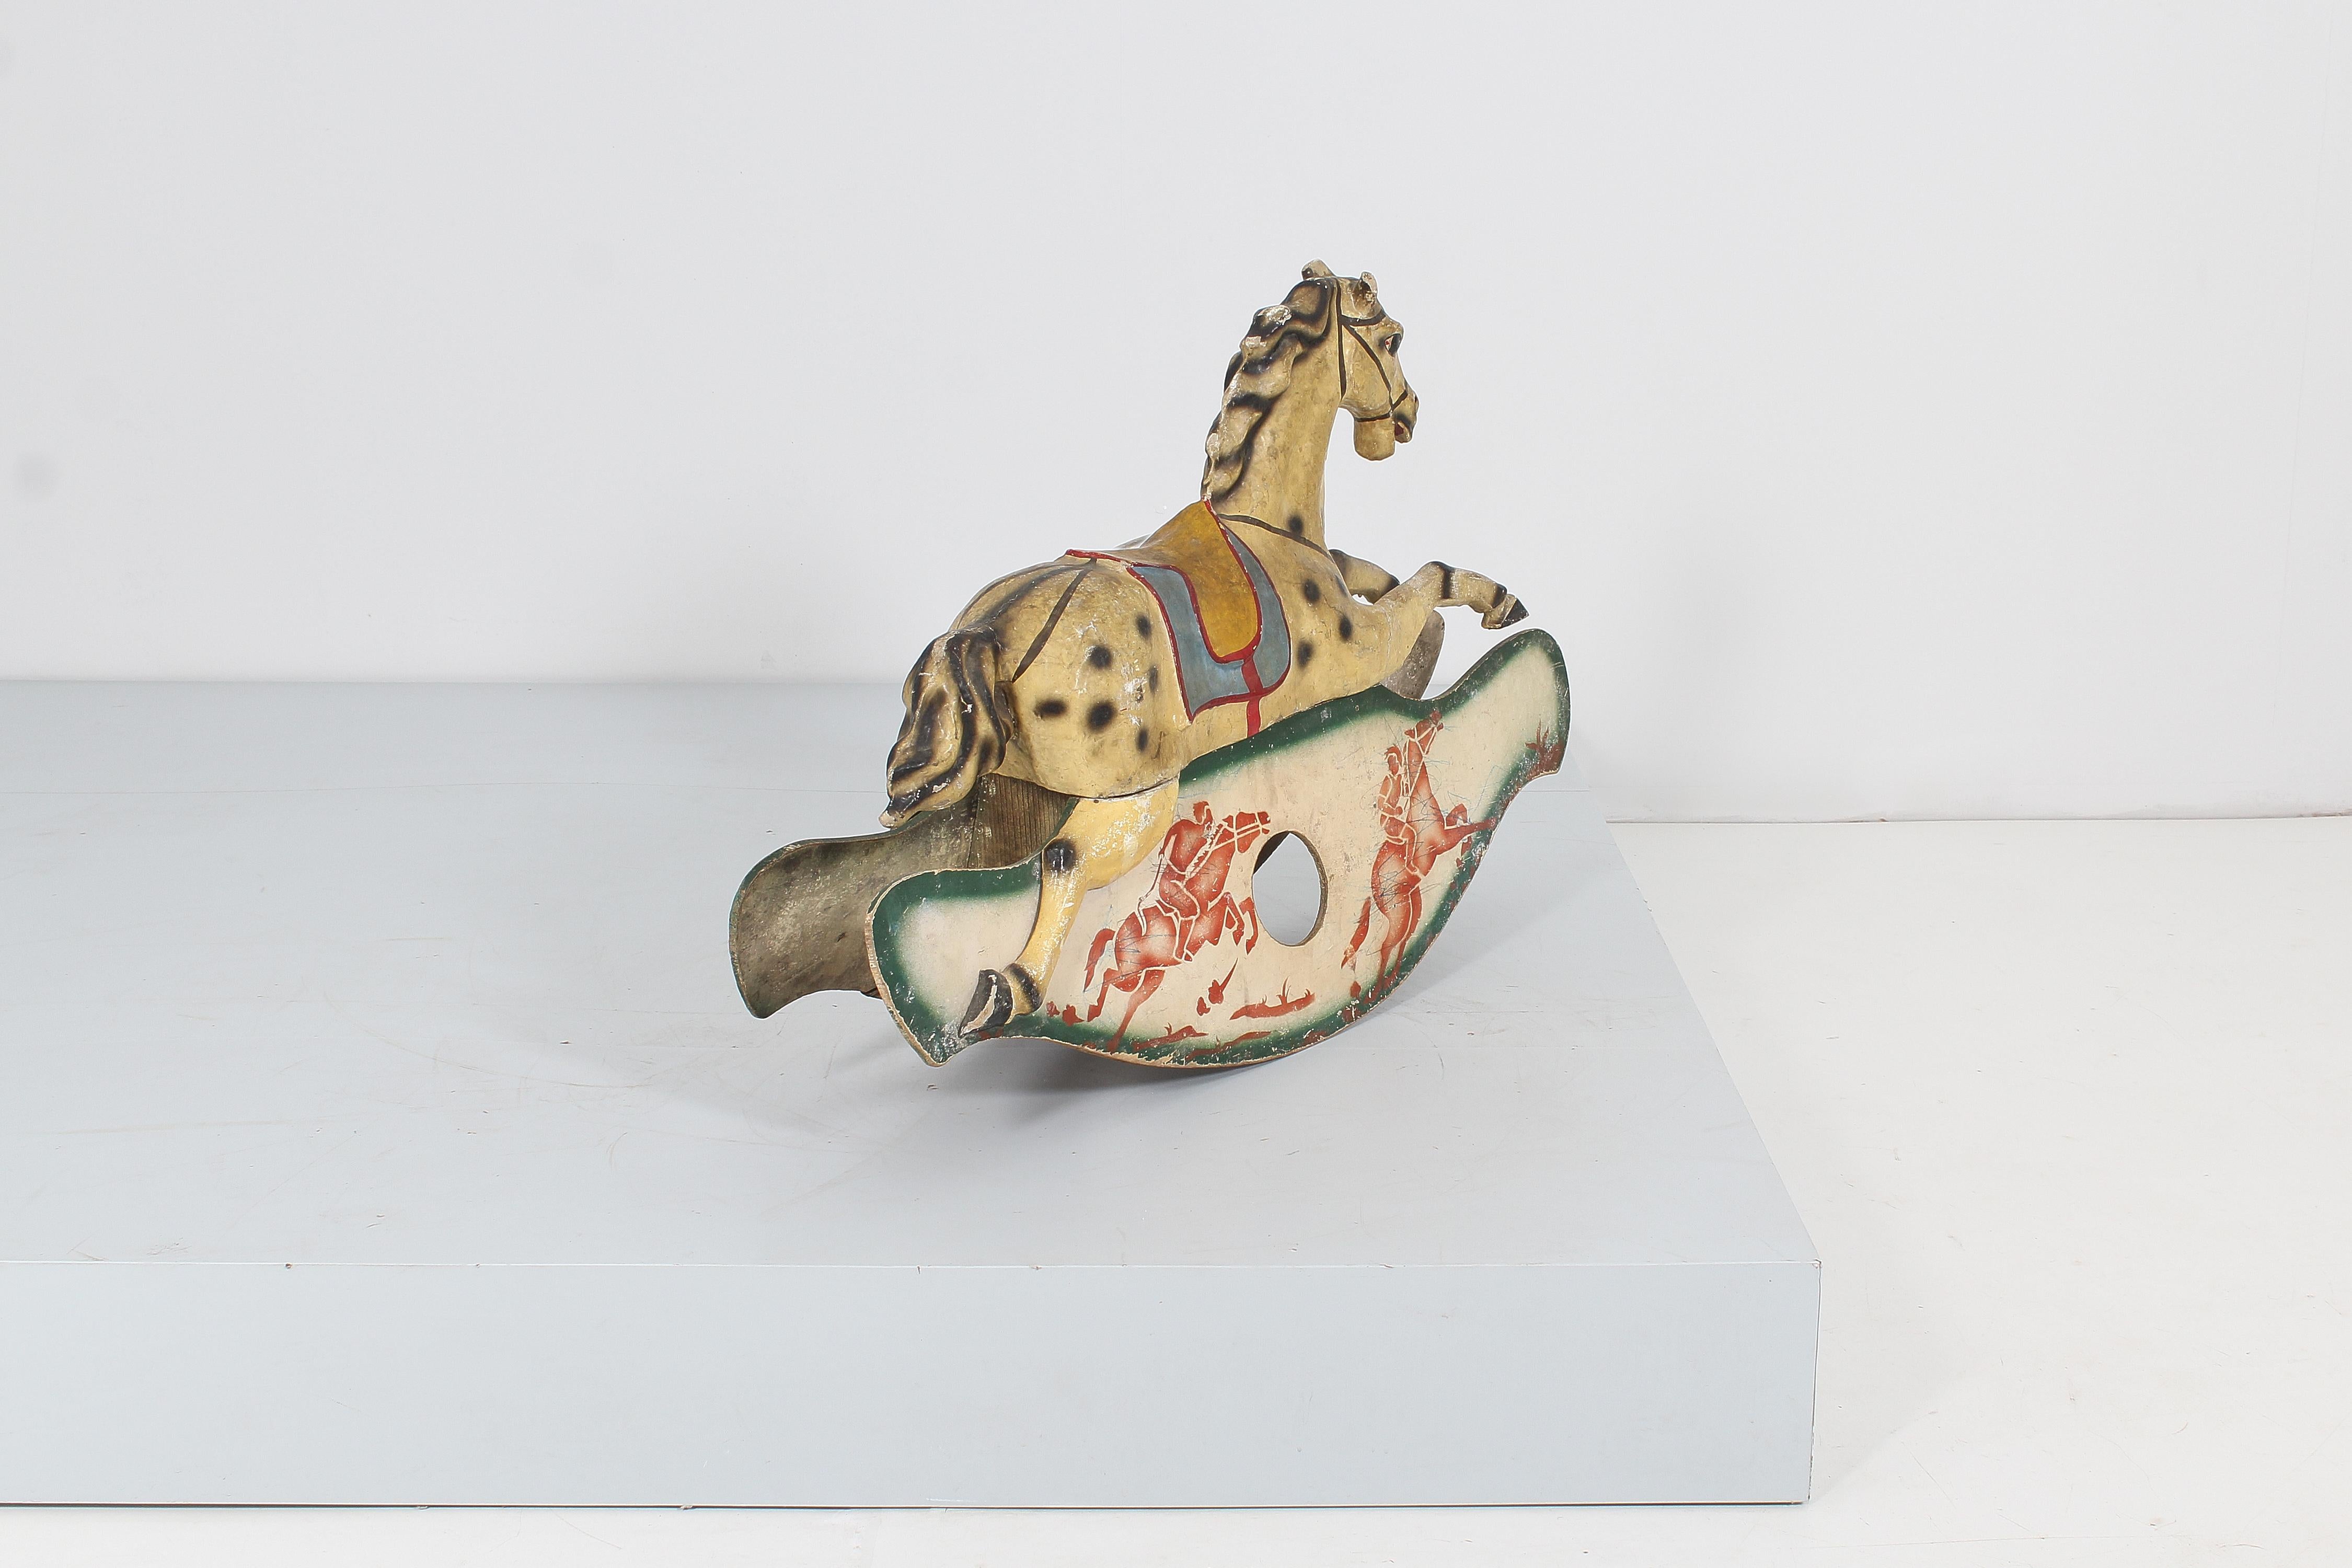 Italian Mid-19th Century Handmade Rocking Horse Papier-Mâché Metal and Wood Italy 1840s For Sale